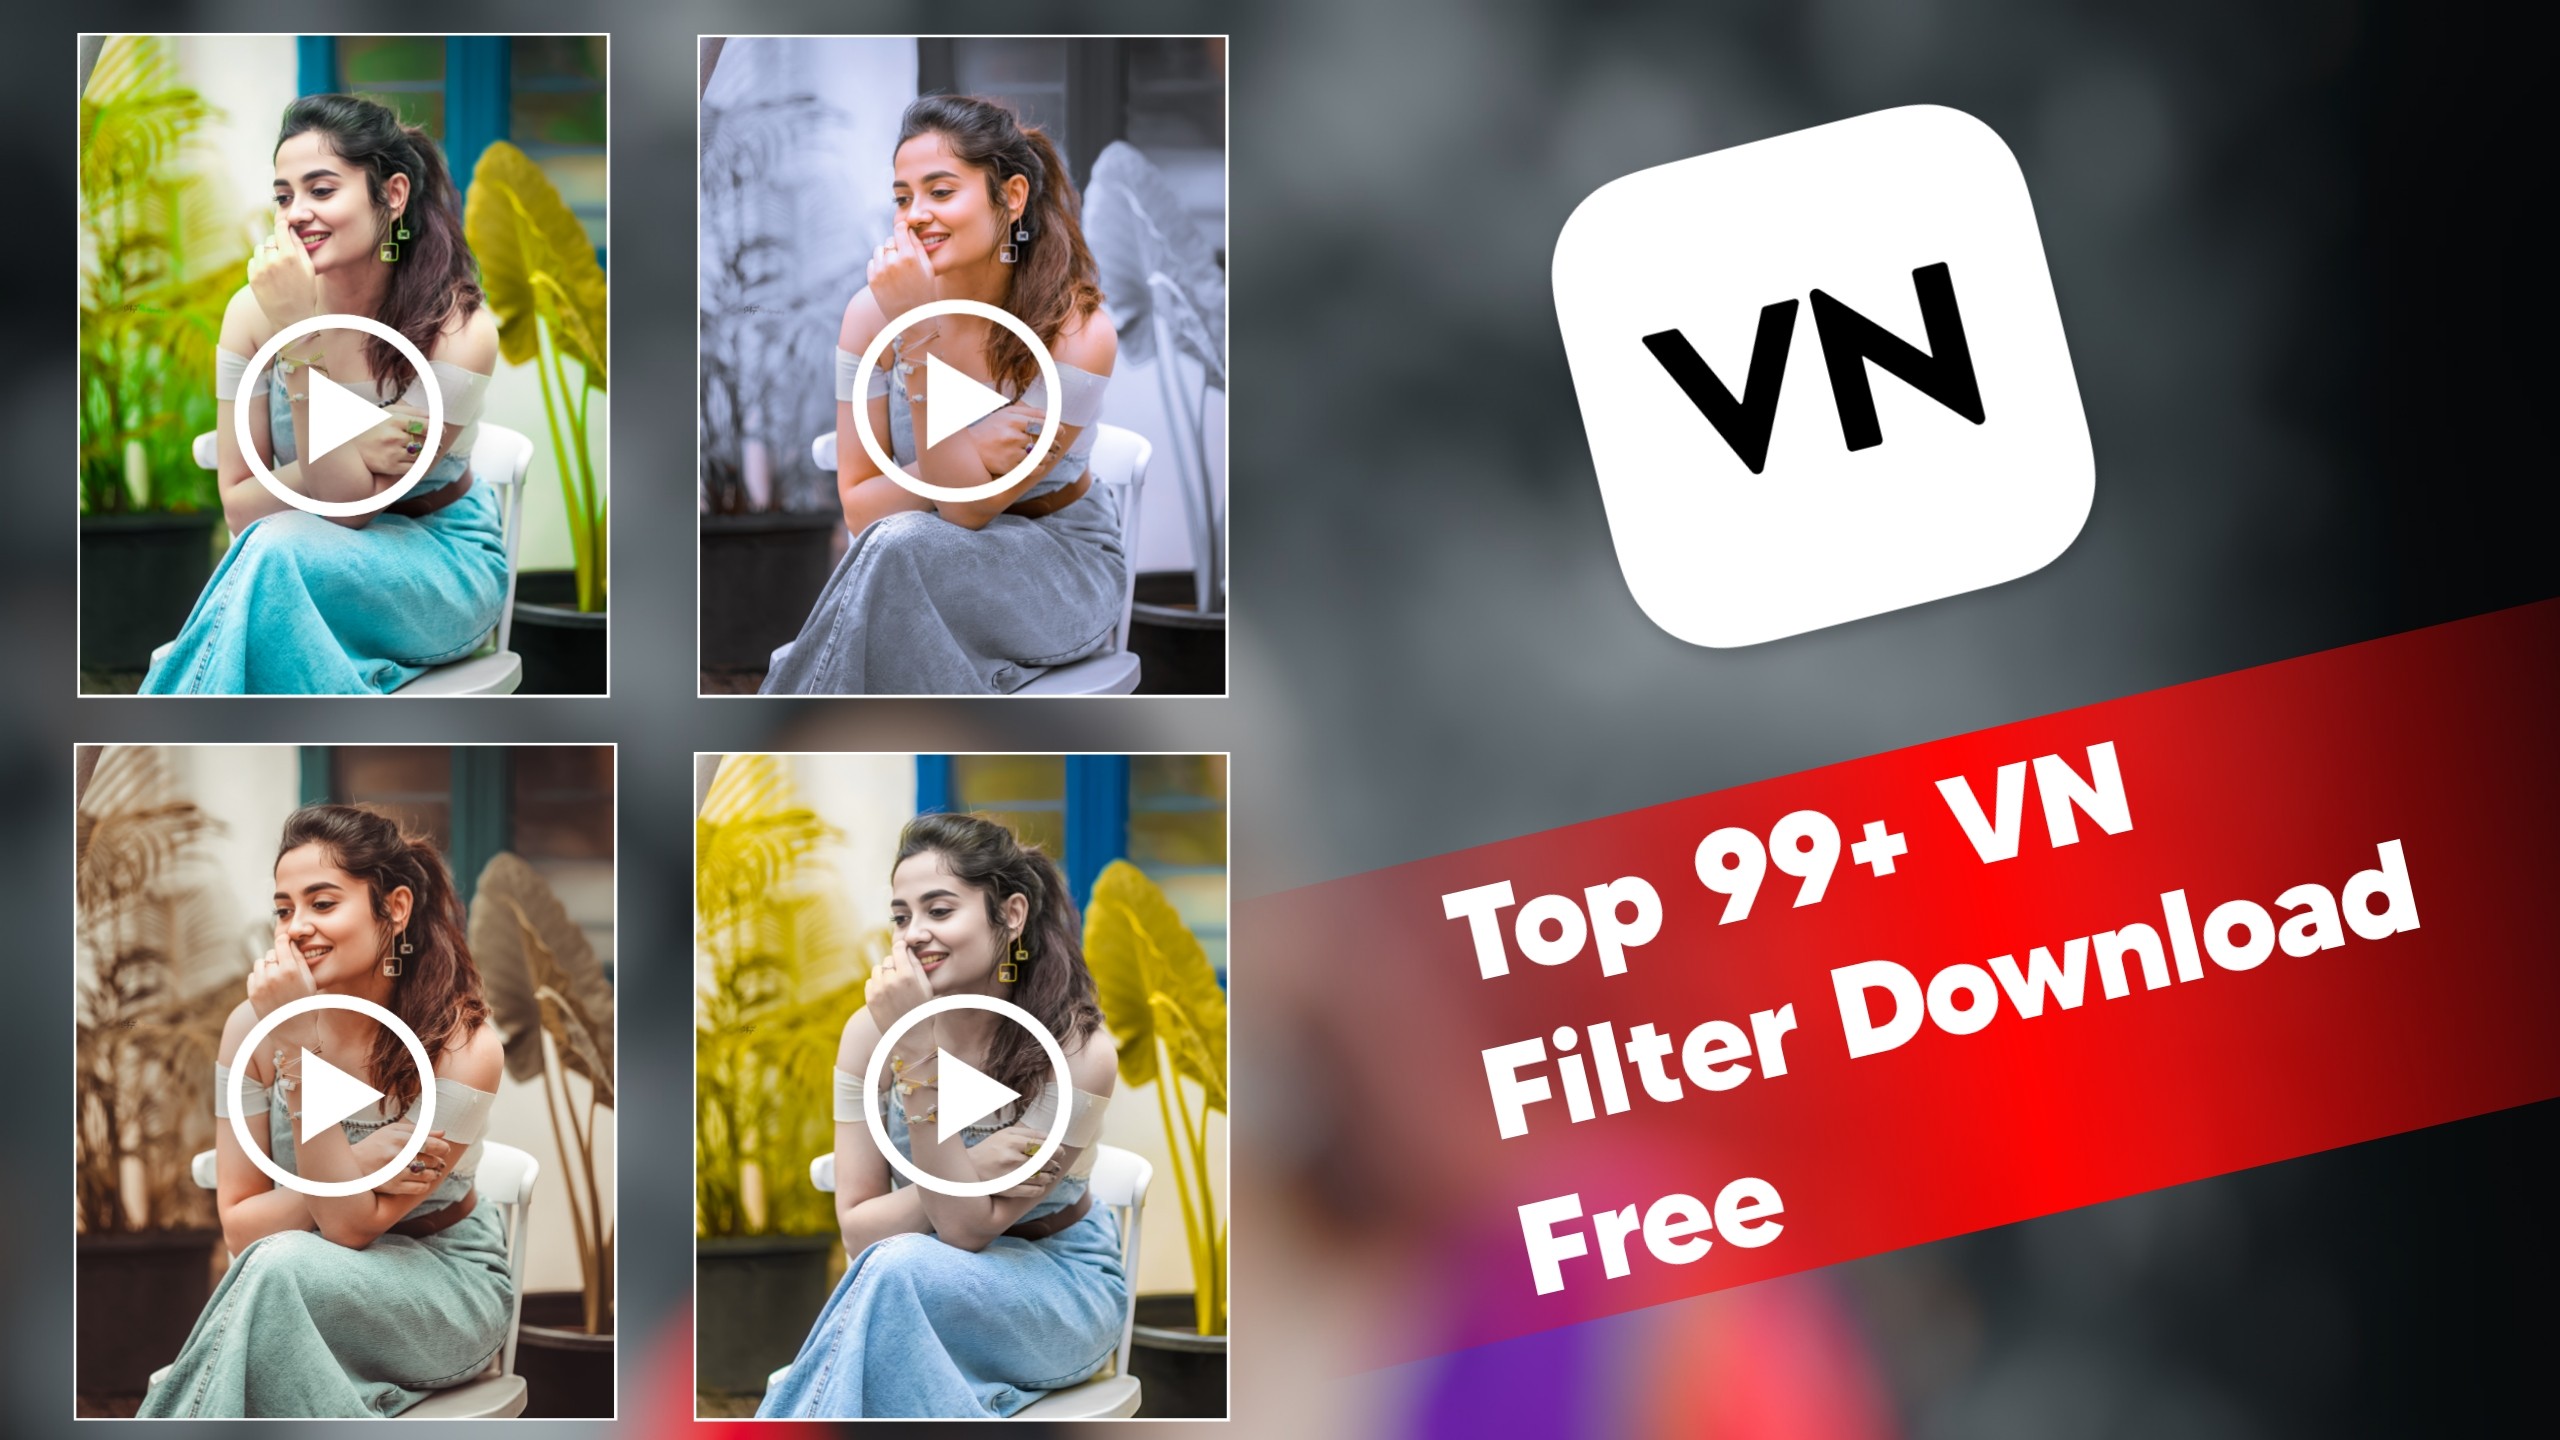 Top 99+ Vn Filter Download Free